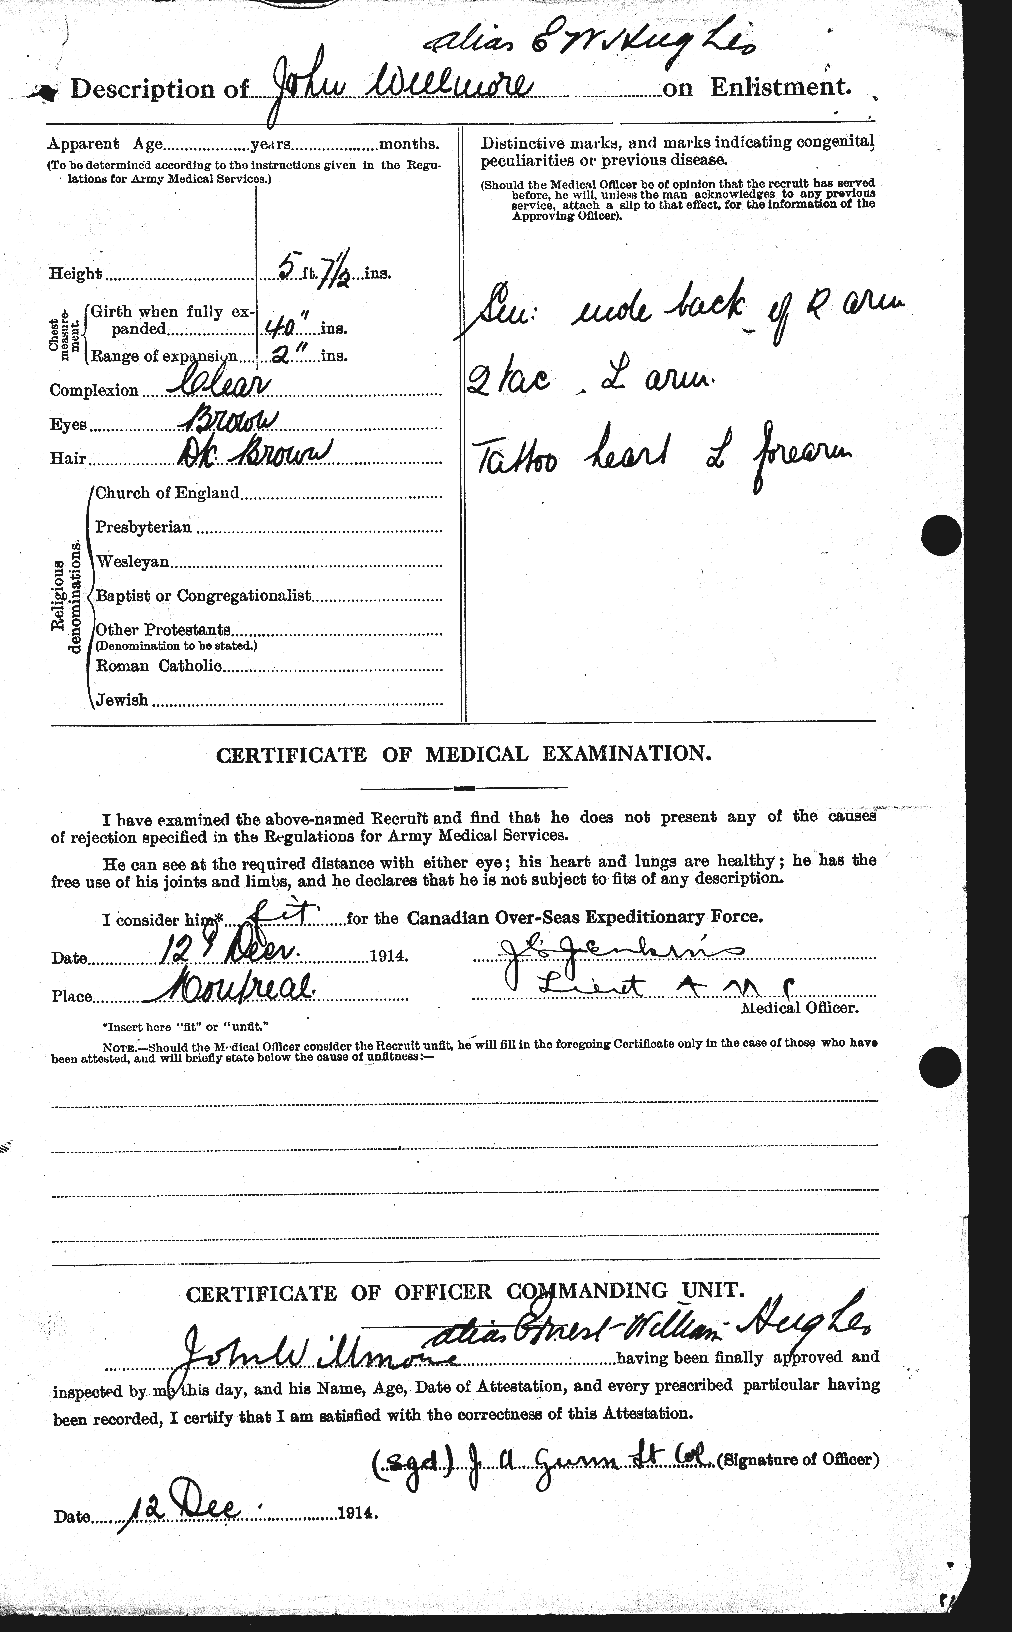 Personnel Records of the First World War - CEF 403756b